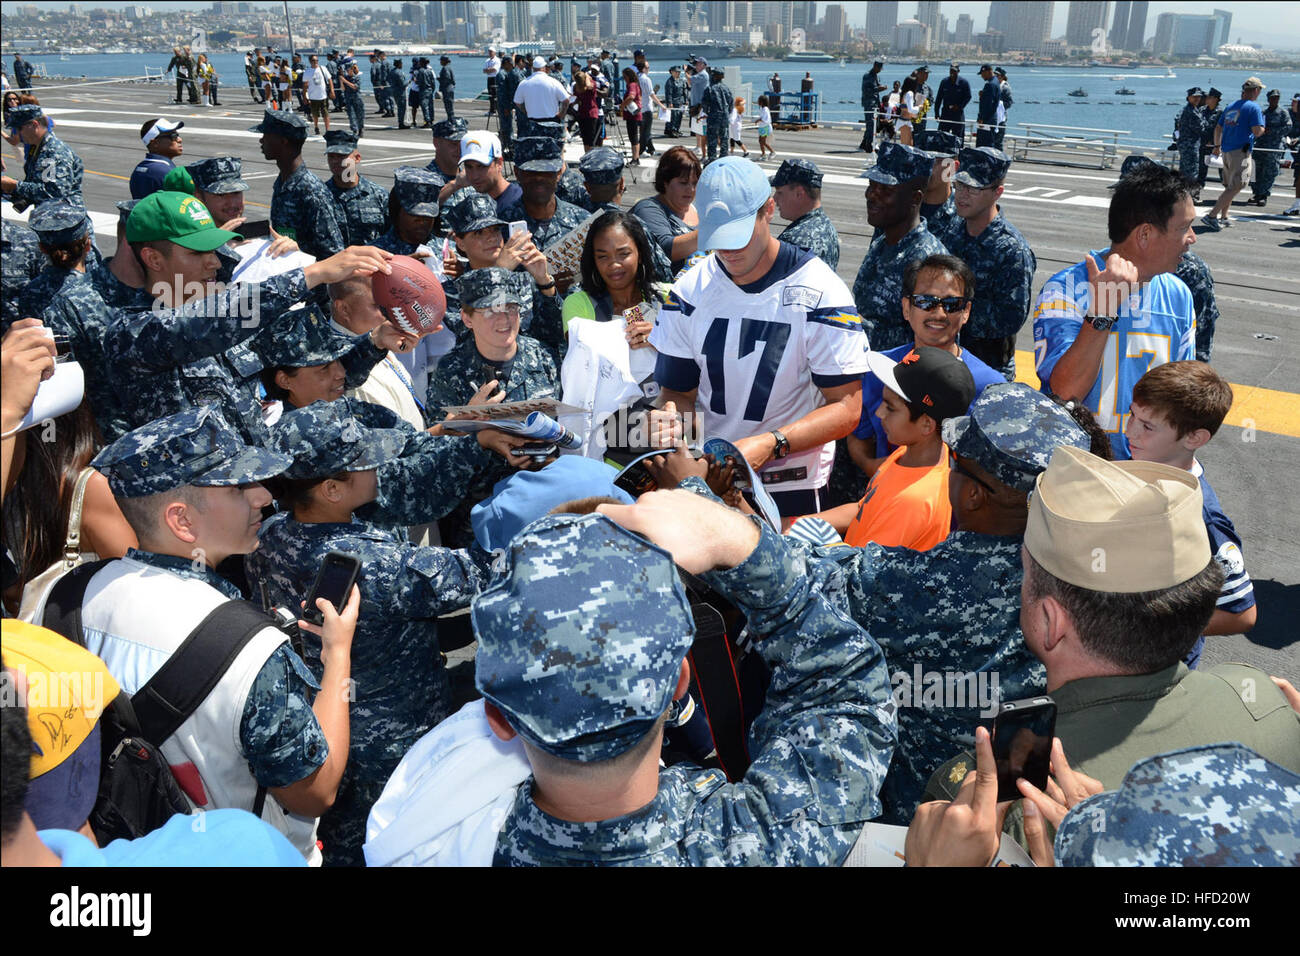 Sailors aboard the aircraft carrier USS Ronald Reagan (CVN 76) wait for autographs from San Diego Chargers quarterback Philip Rivers after a simulated practice on the flight deck. Ronald Reagan is currently moored and home-ported at Naval Base Coronado. (U.S. Navy photo by Mass Communication Specialist 3rd Class Timothy Schumaker/Released) San Diego Chargers visit USS Ronald Reagan 130828-N-UK306-282 Stock Photo